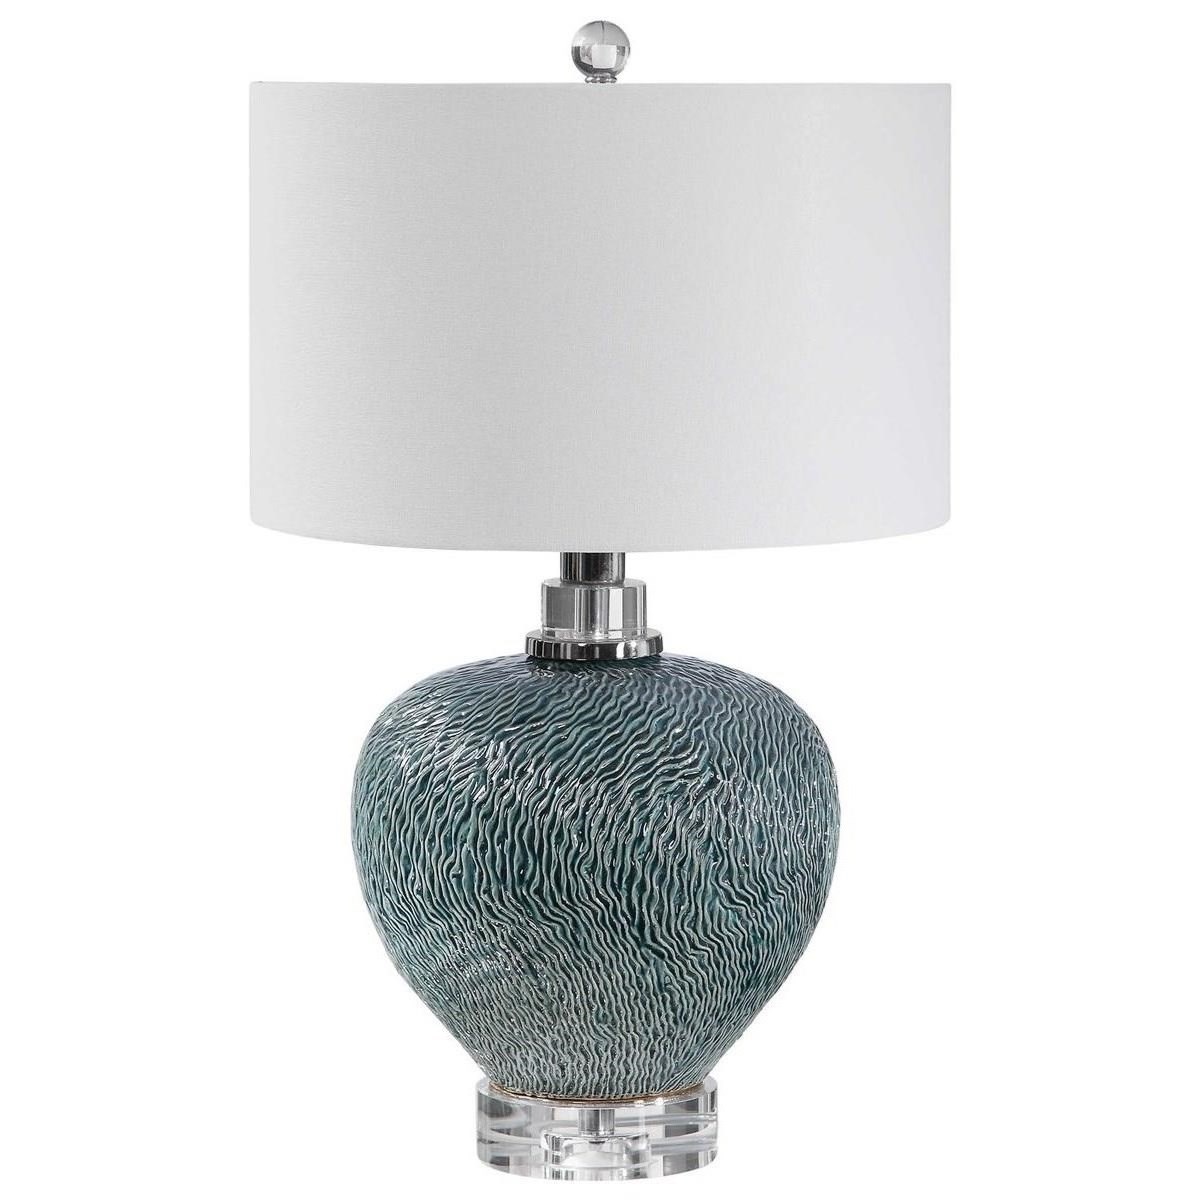 uttermost table lamps